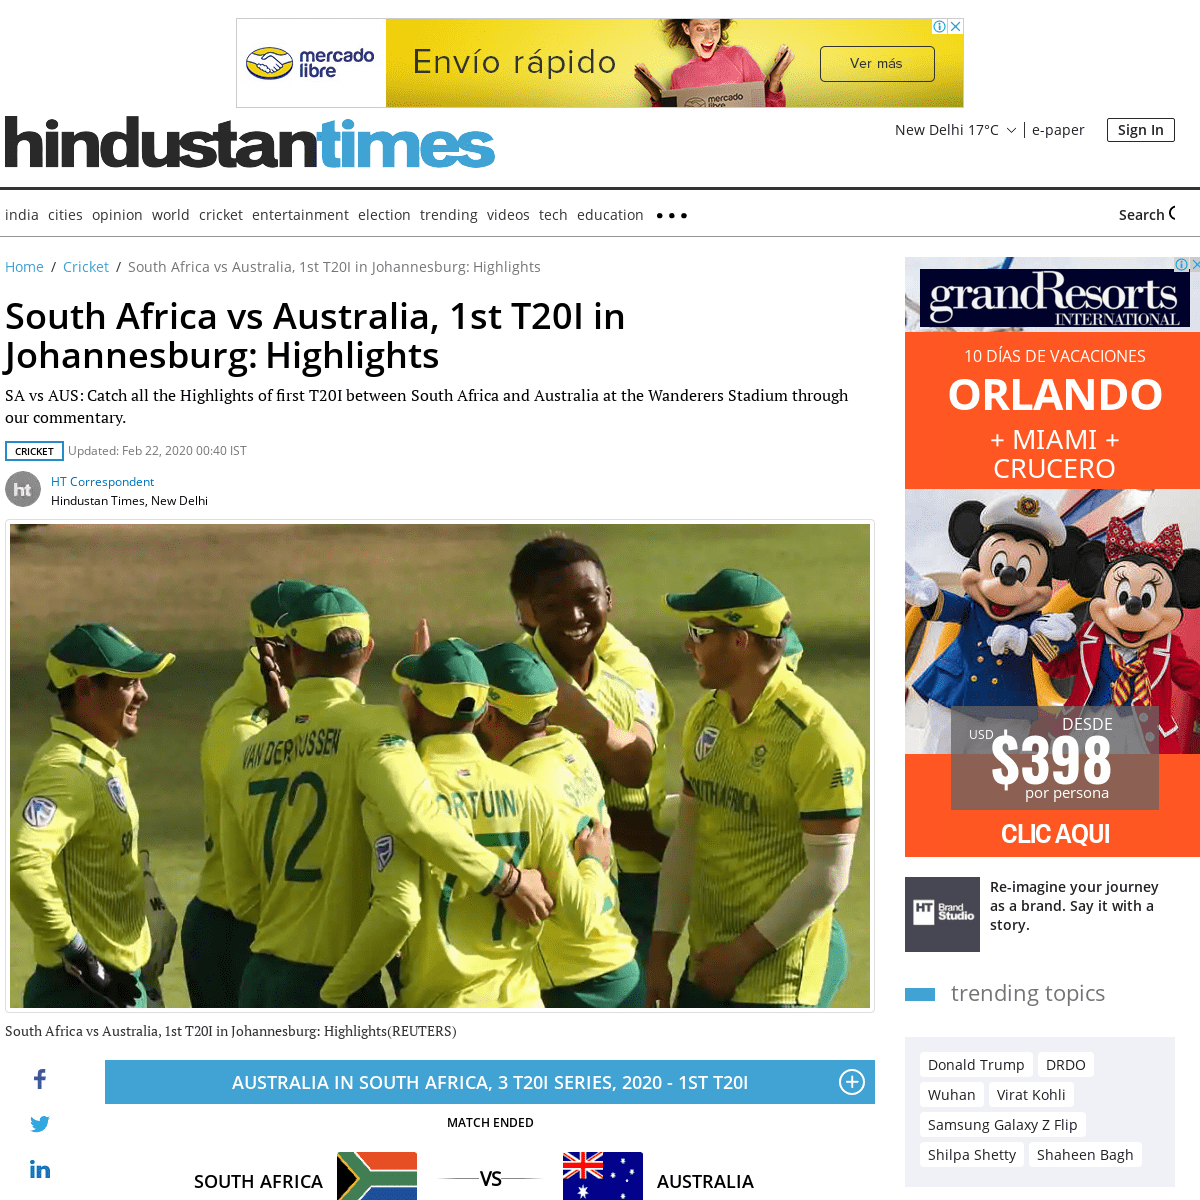 A complete backup of www.hindustantimes.com/cricket/south-africa-vs-australia-1st-t20i-in-johannesburg-live-cricket-score-and-up